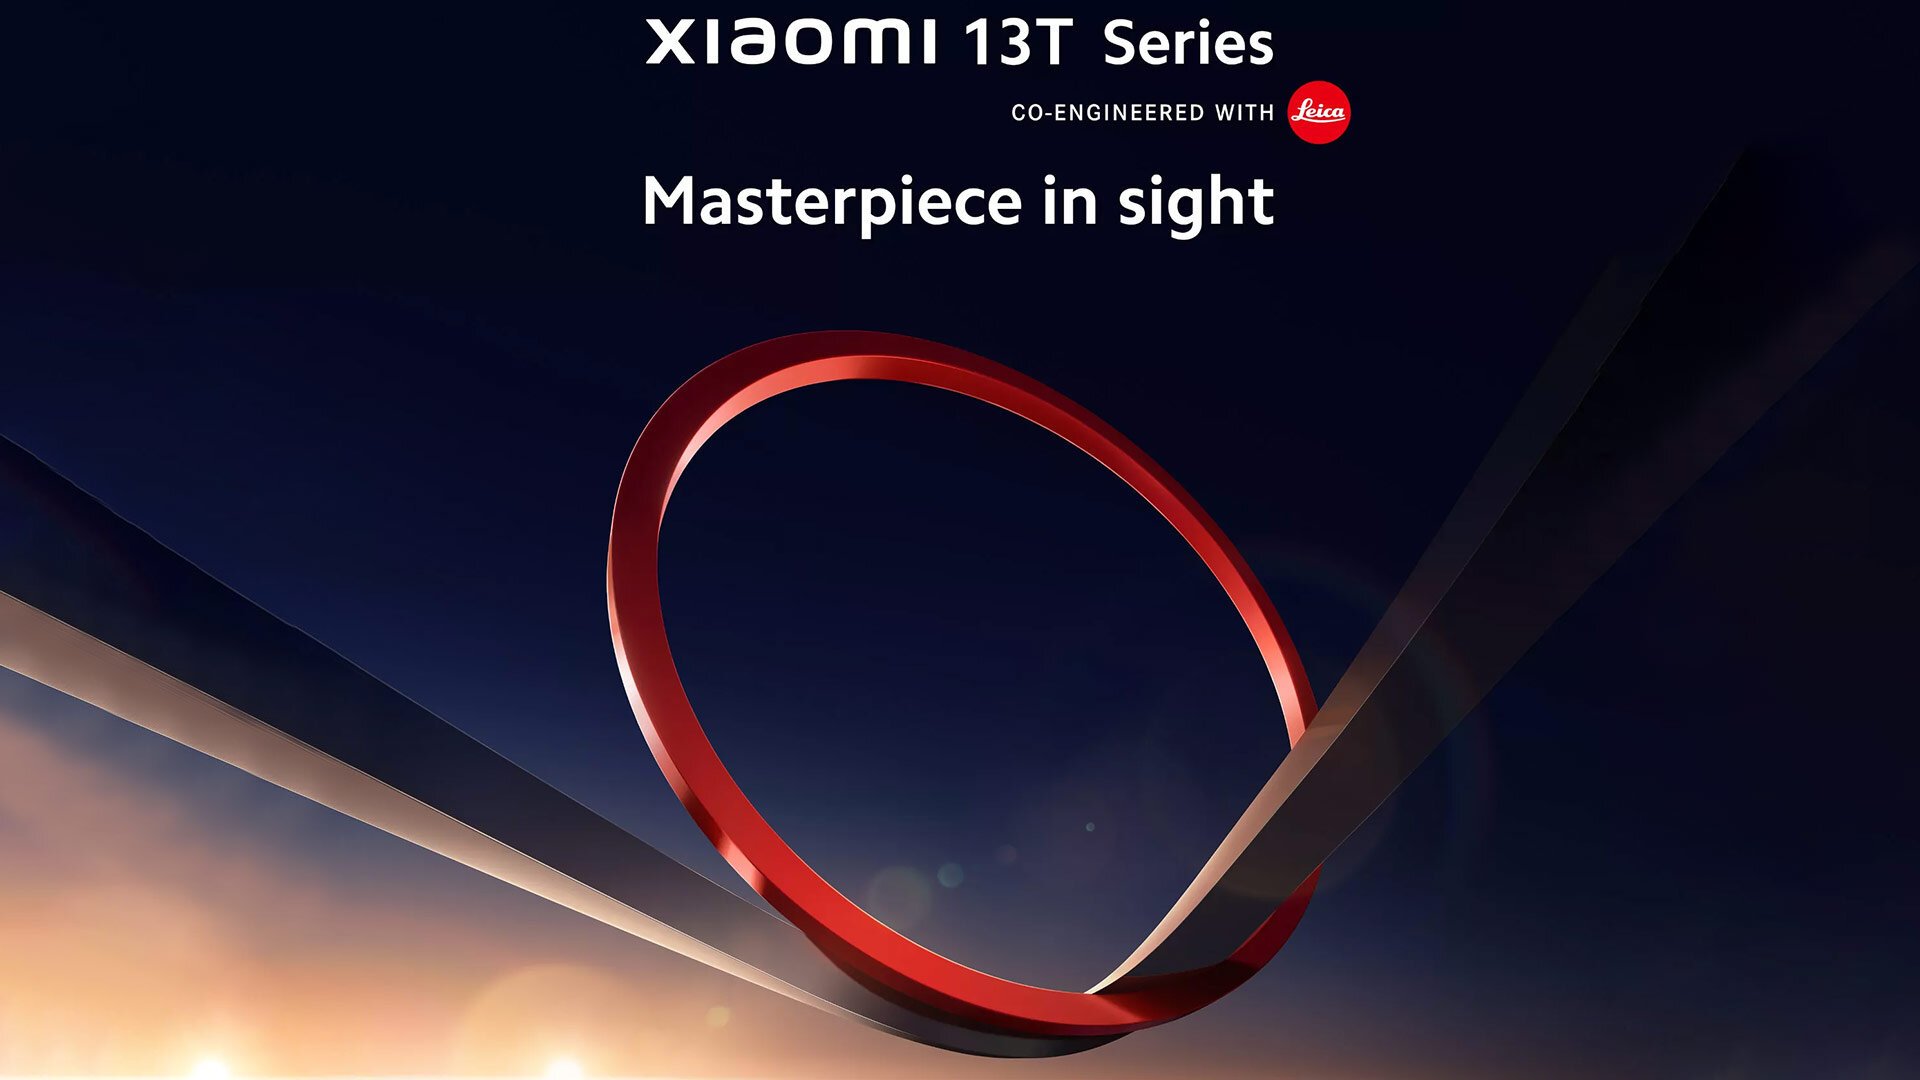 The Xiaomi 13T series comes this month with Leica-branded cameras – Xiaomi